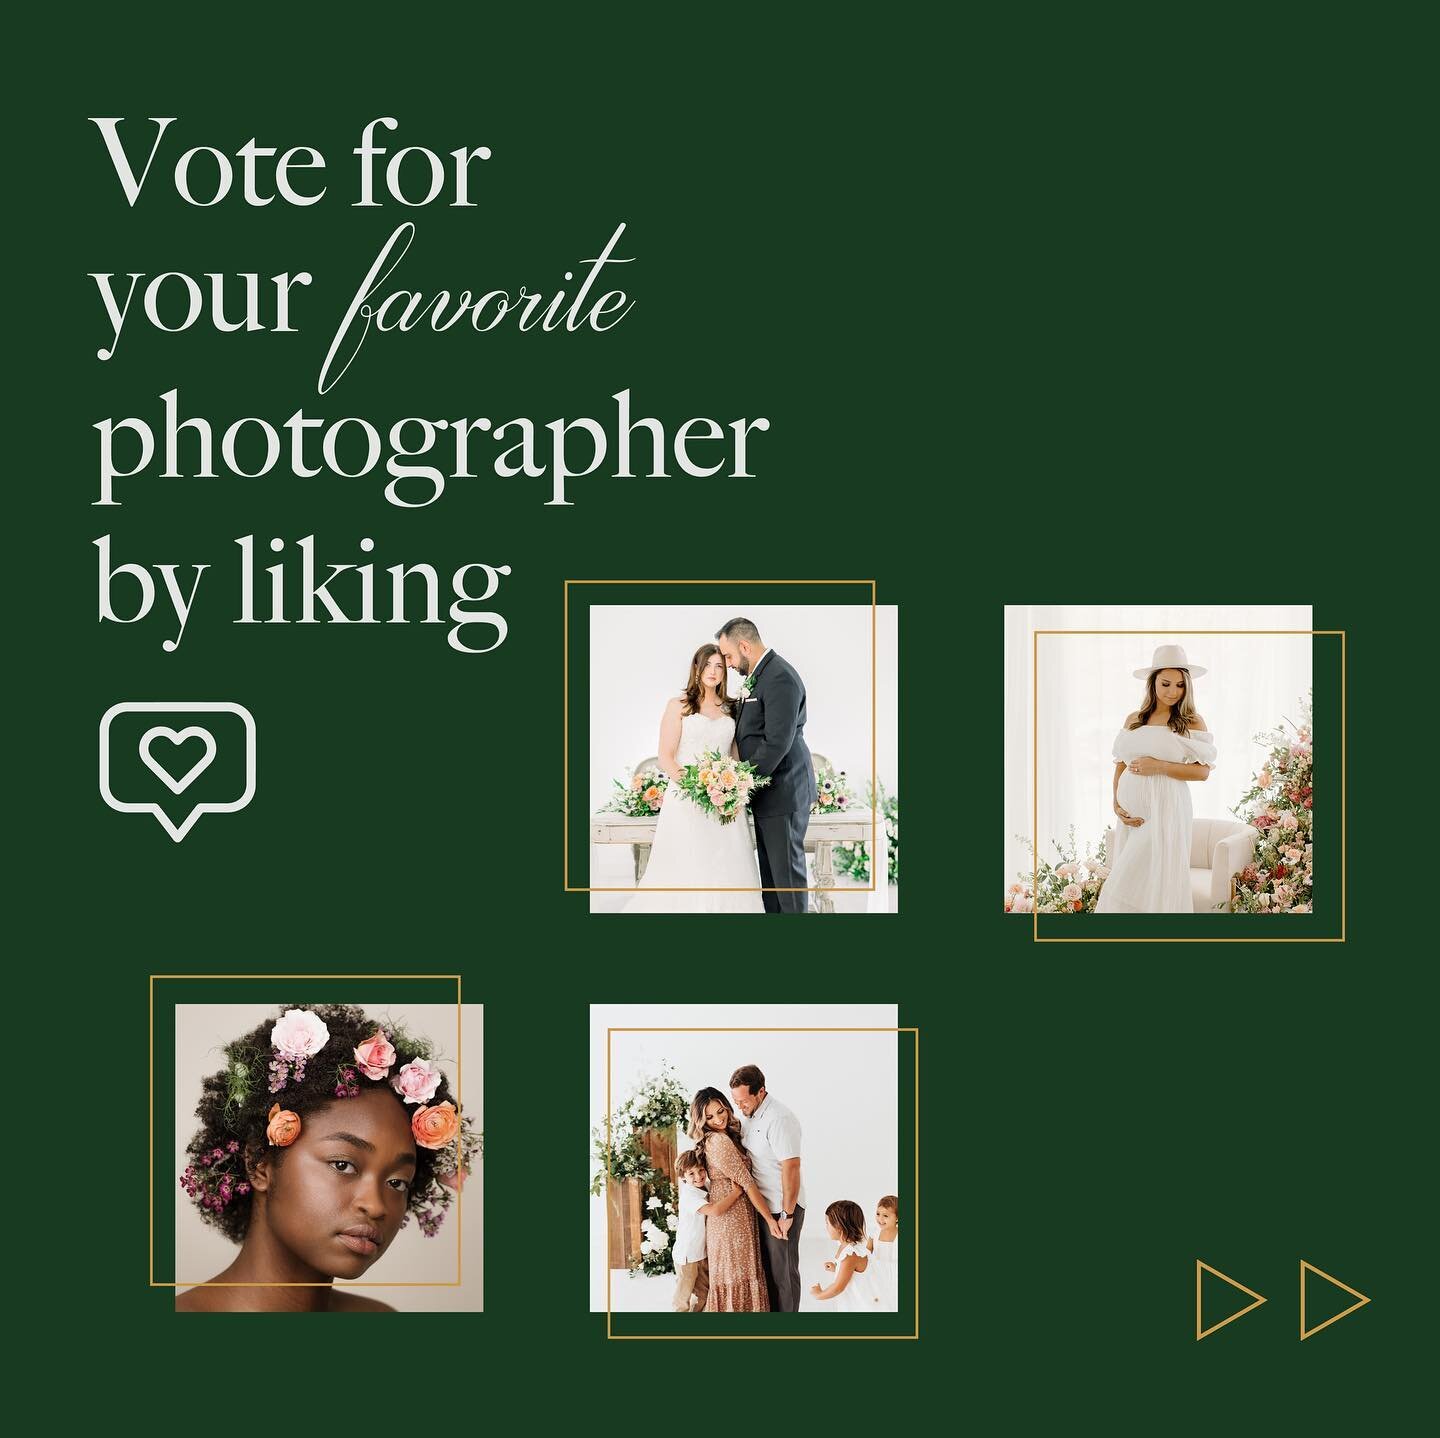 Not only will one lucky winner receive a photoshoot complete with florals + furniture rentals, but one of our participating photographers will also win a one-year membership at Studio Proper - valued at $400/month!

Make a photographers dream come tr